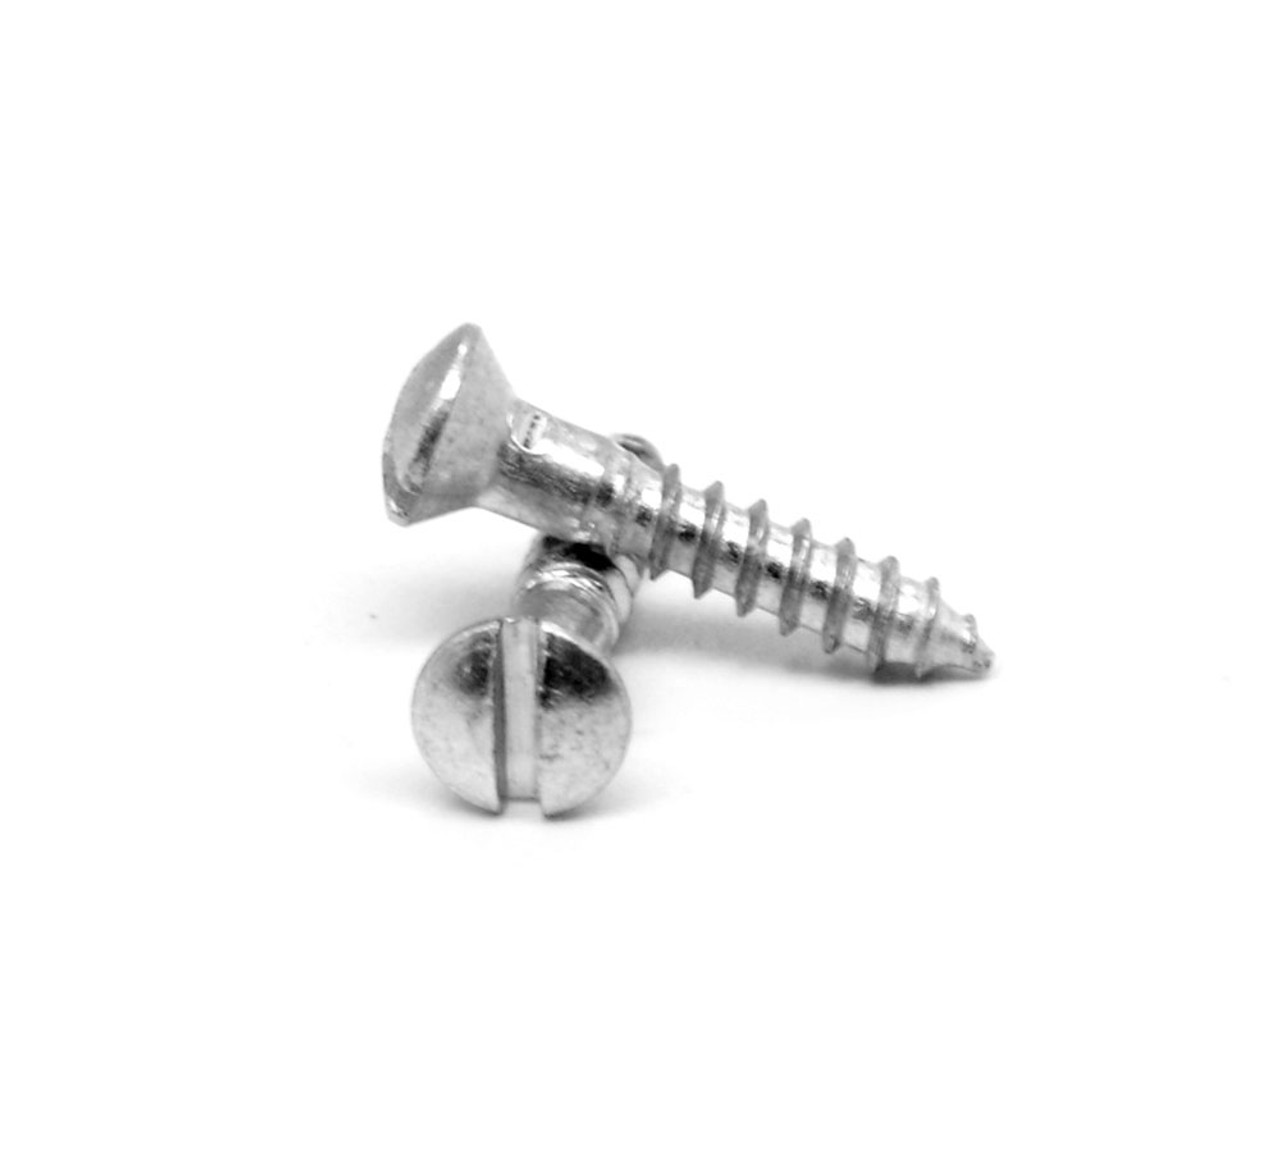 #8 x 3/4" Wood Screw Slotted Oval Head Low Carbon Steel Zinc Plated